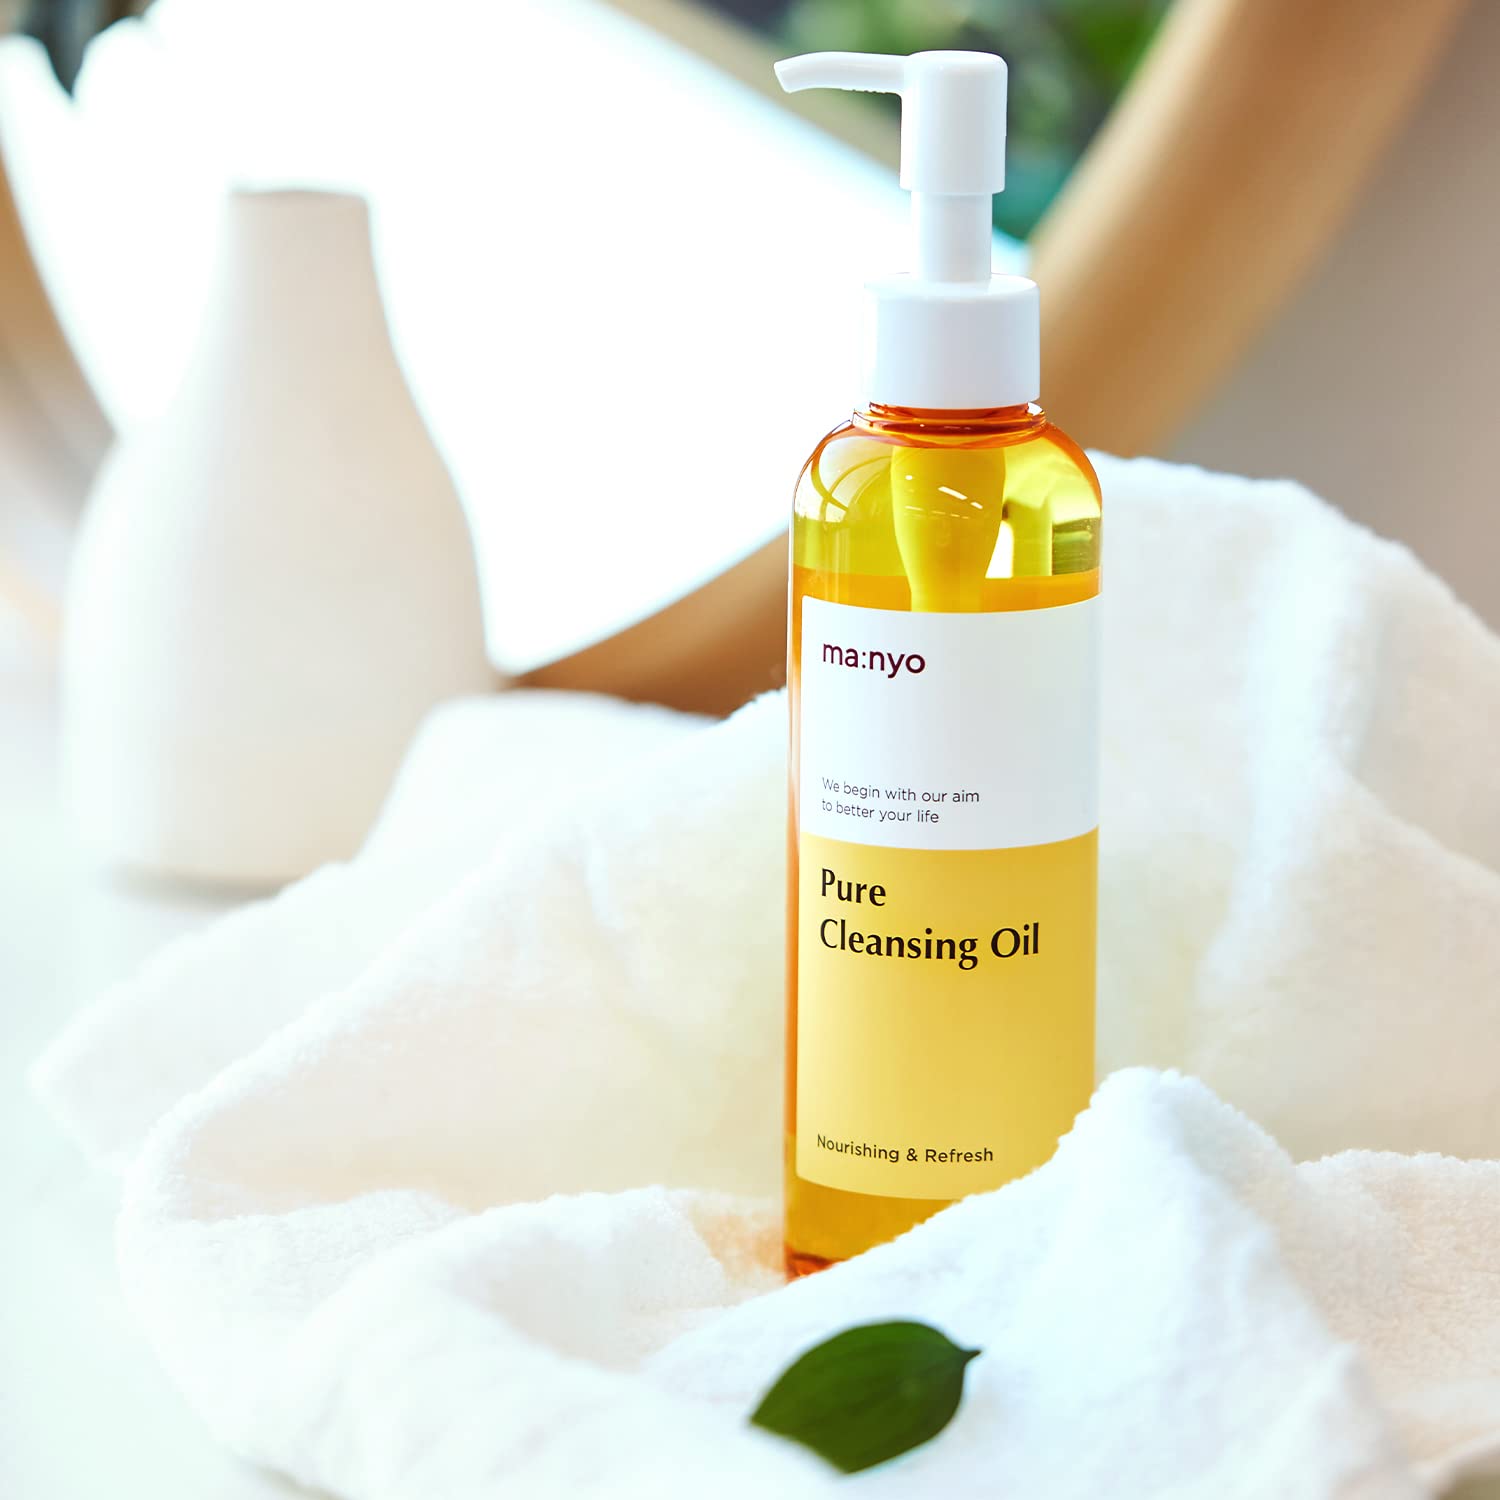 [ MA:NYO FACTORY ] Pure Cleansing Oil, 200ml / 6.7 fl oz